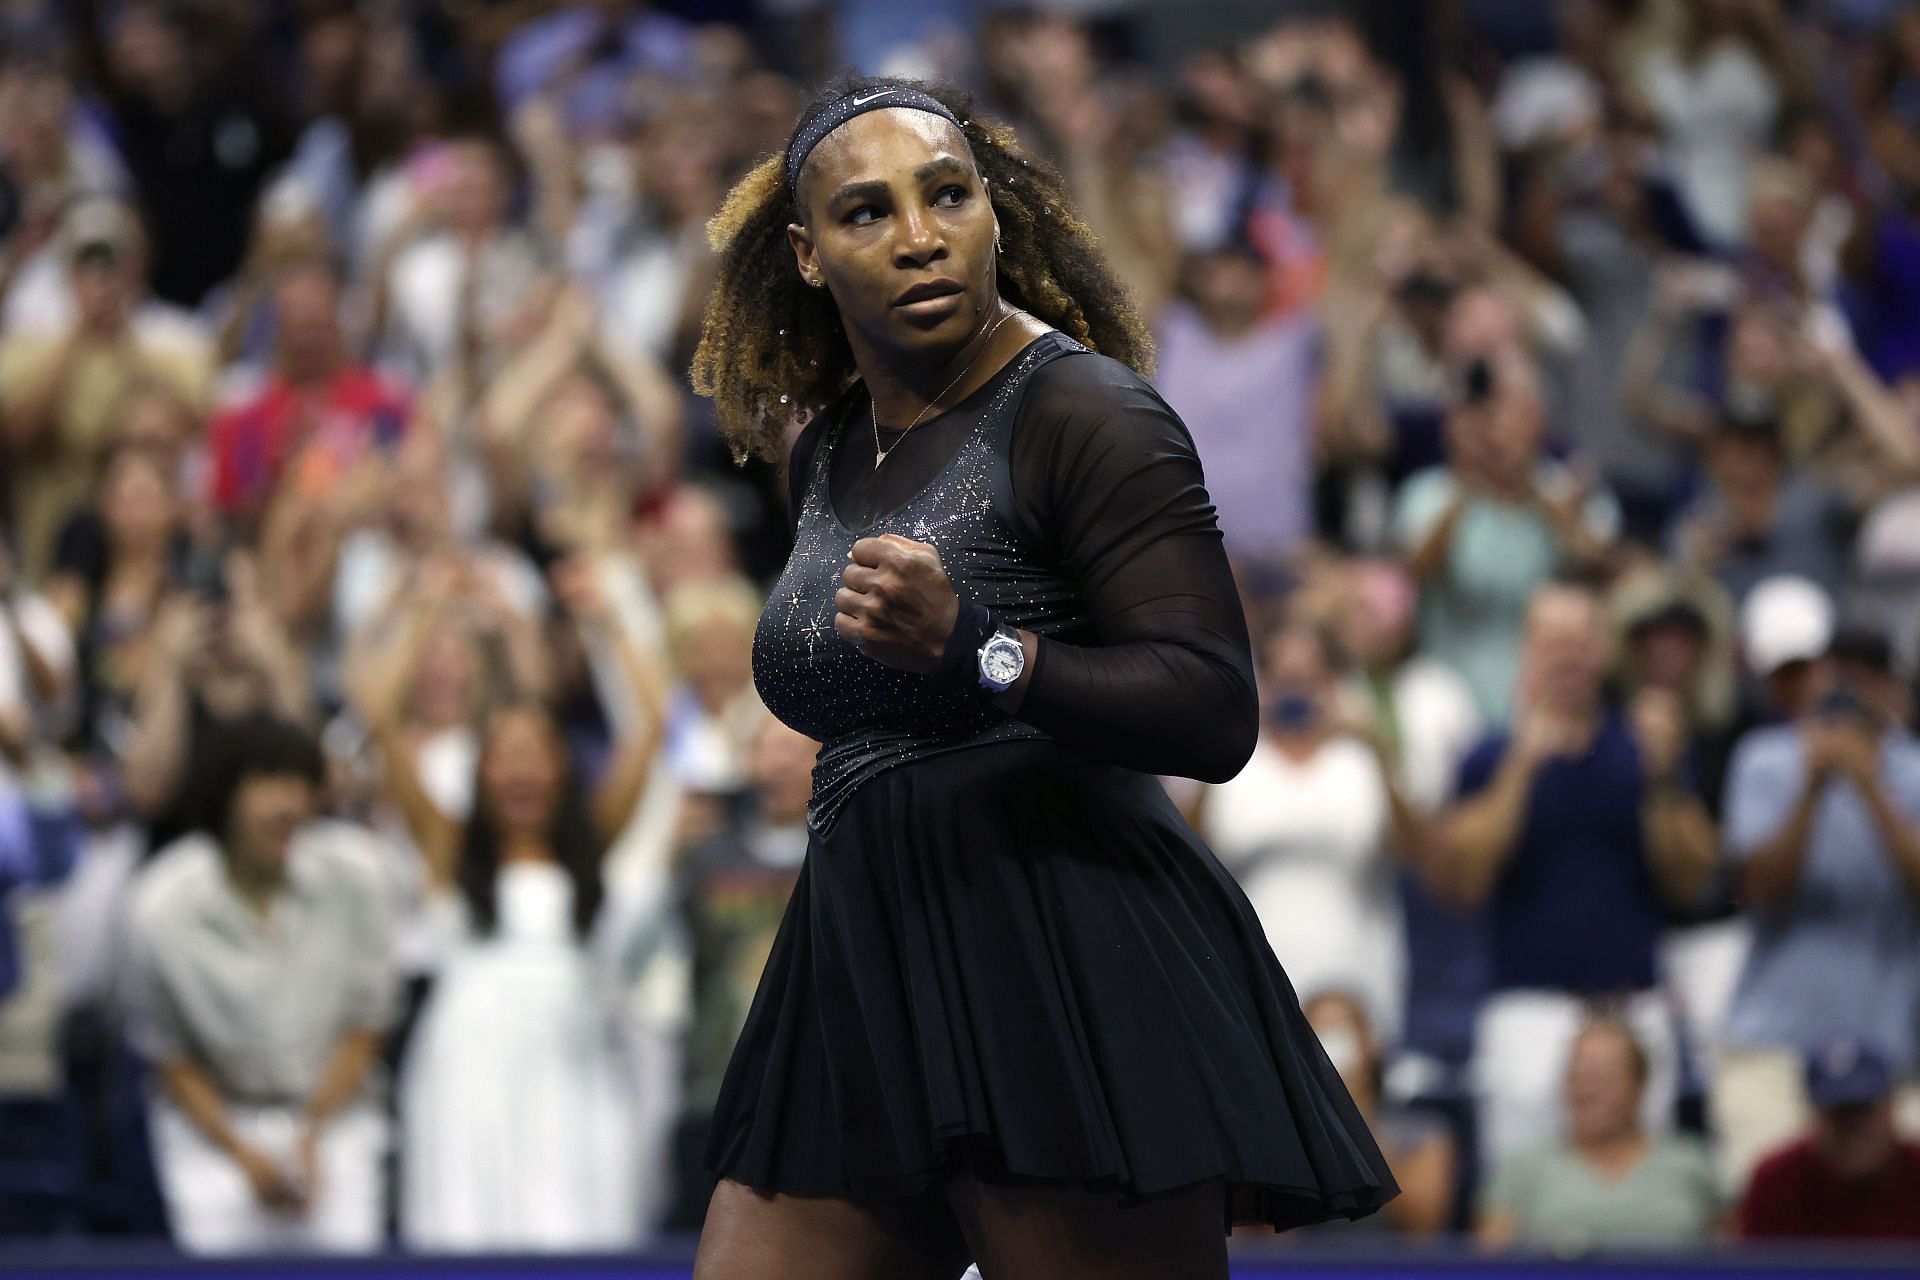 Serena Williams during her match on Wednesday